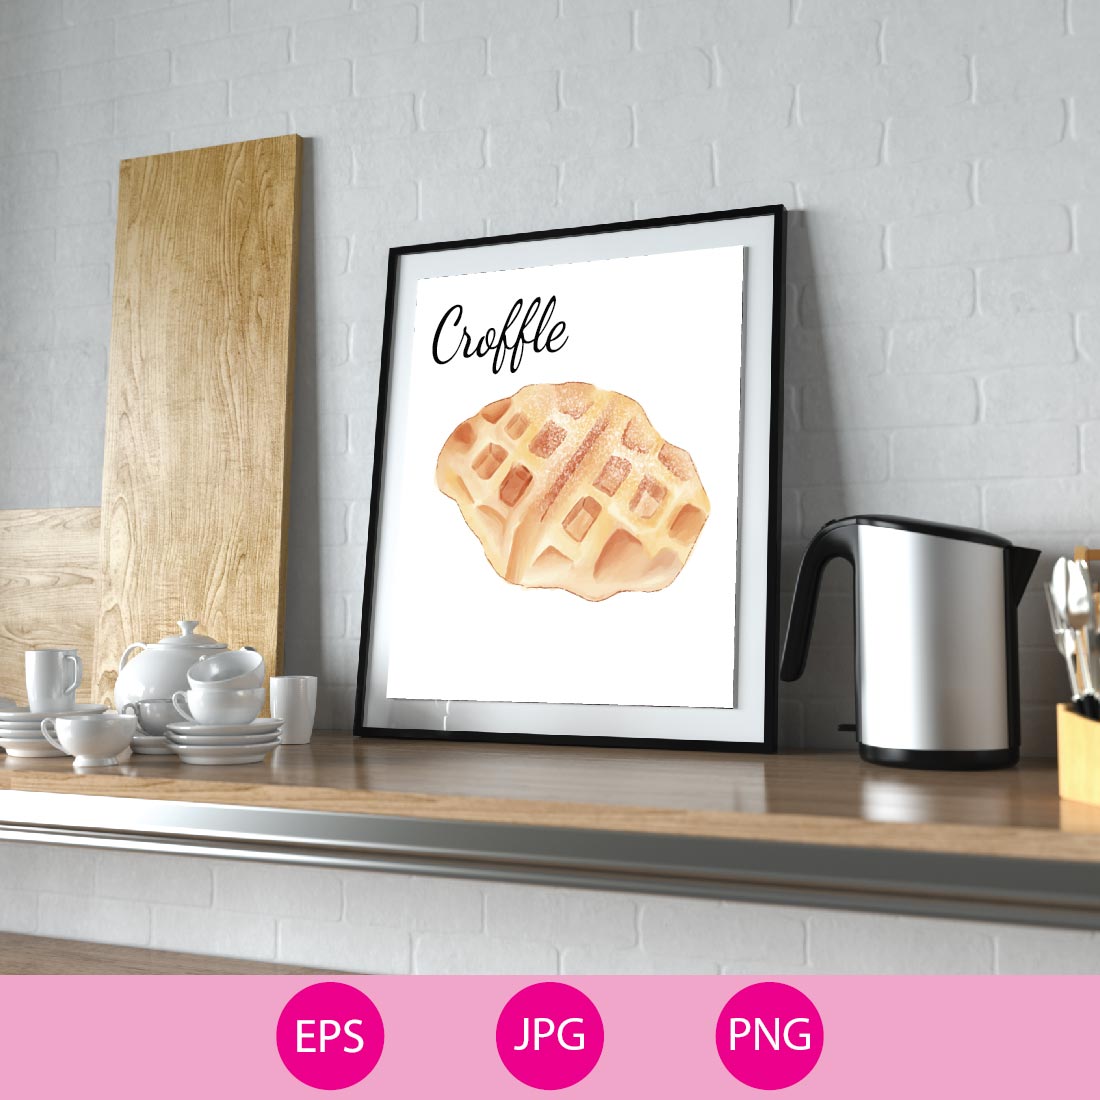 4 Delicious Pastries for Kitchen Decoration cover image.